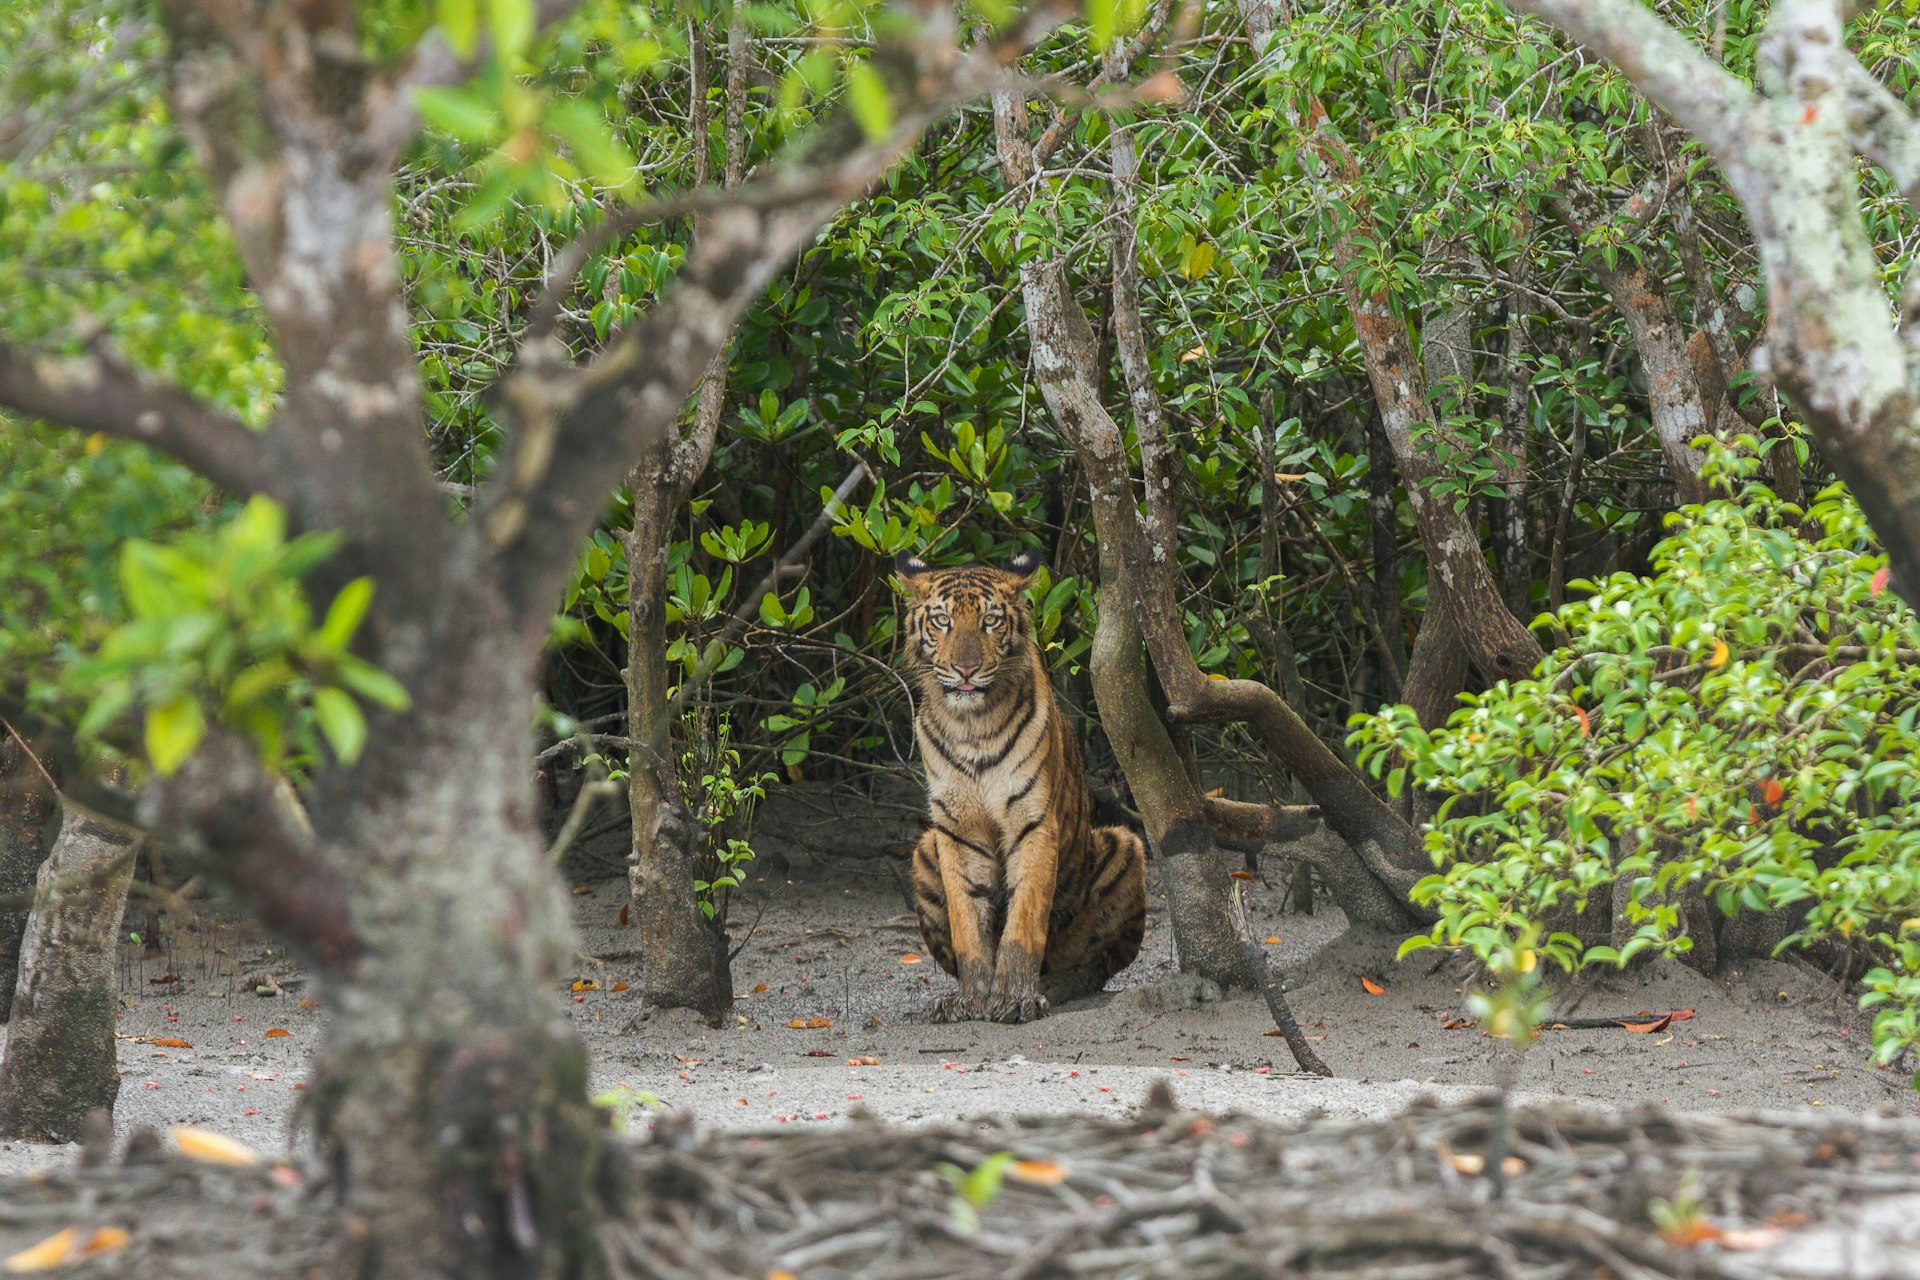 A Bengal tiger with muddy paws sits on the edge of a mangrove forest